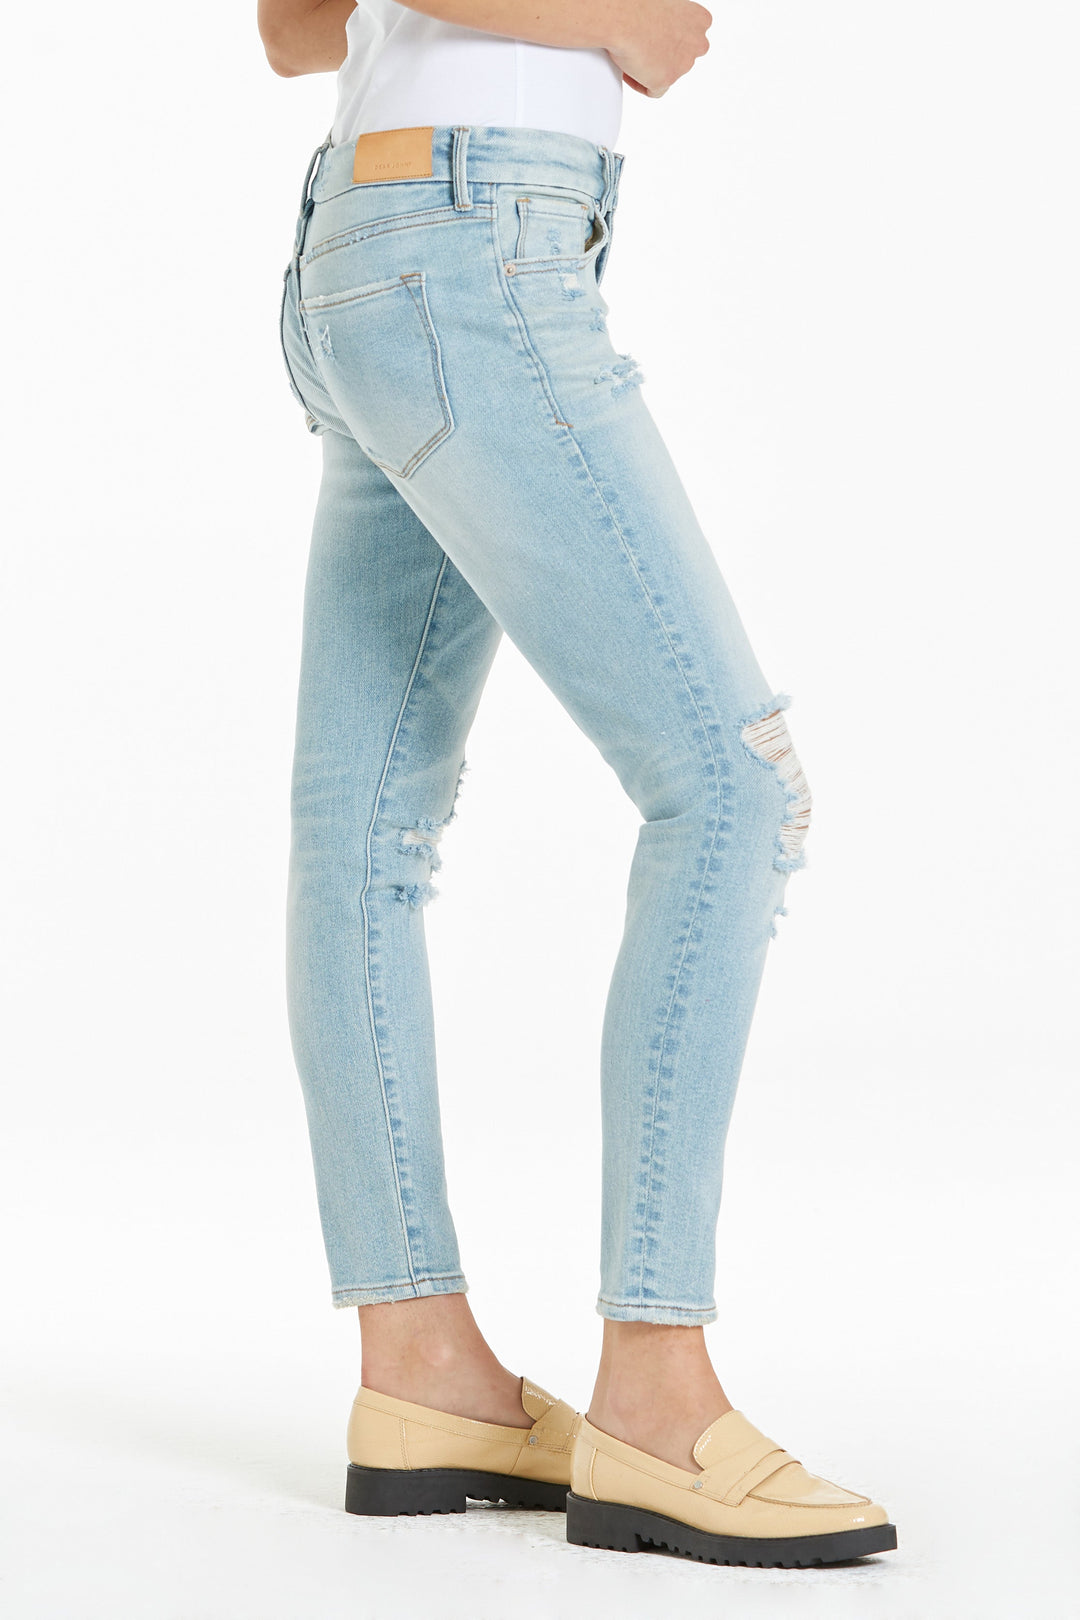 image of a female model wearing a JOYRICH MID RISE ANKLE SKINNY JEANS BELLE ISLE JEANS